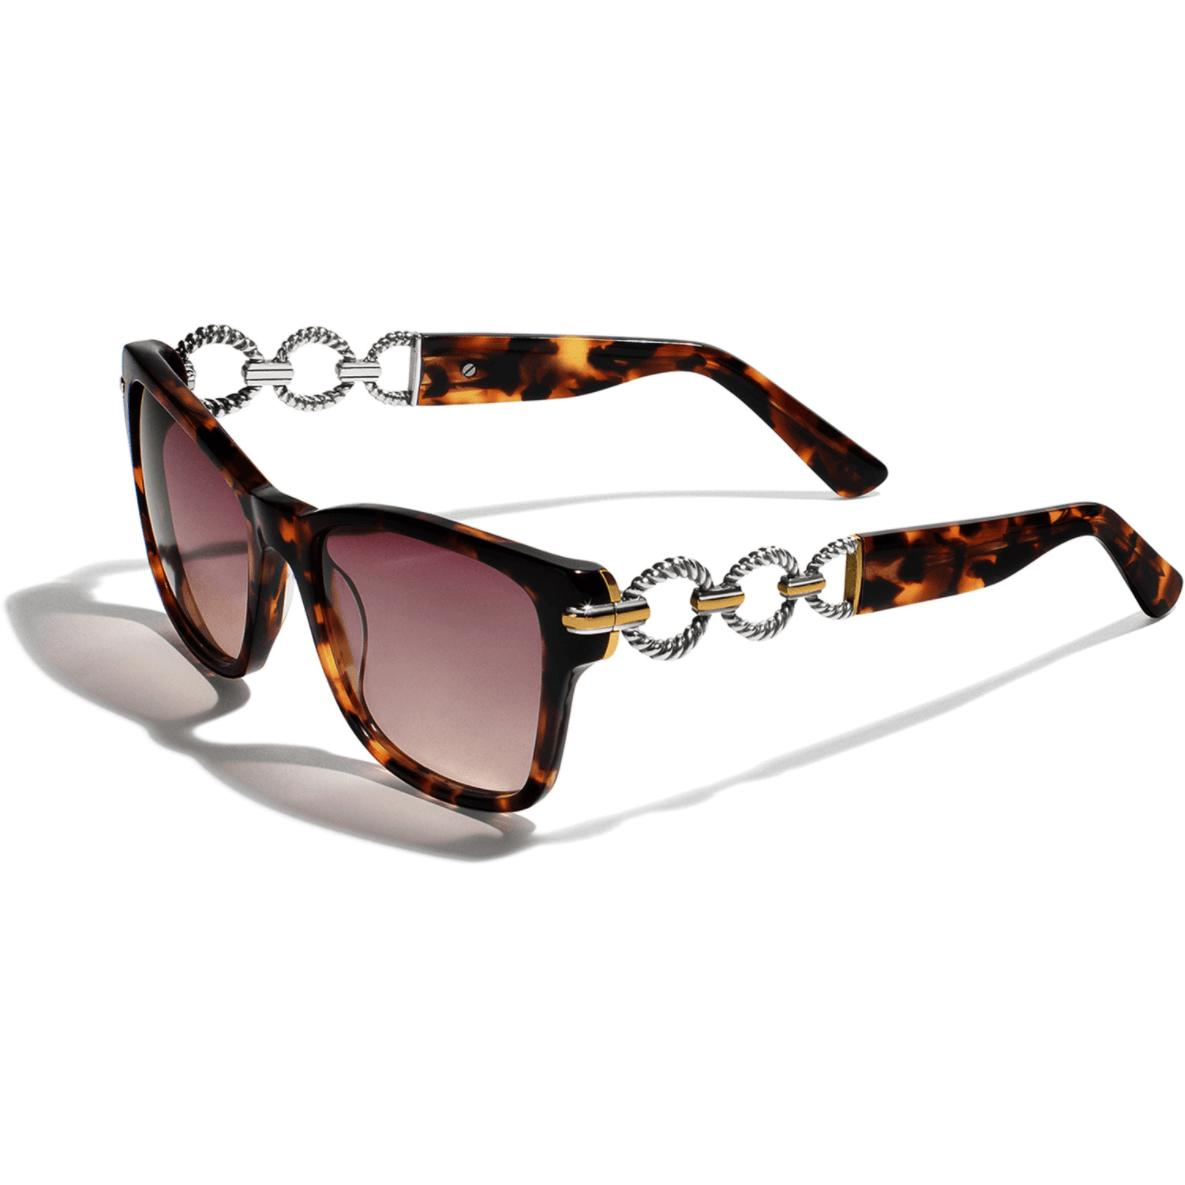 Kindred Sunglasses - Zinnias Gift Boutique